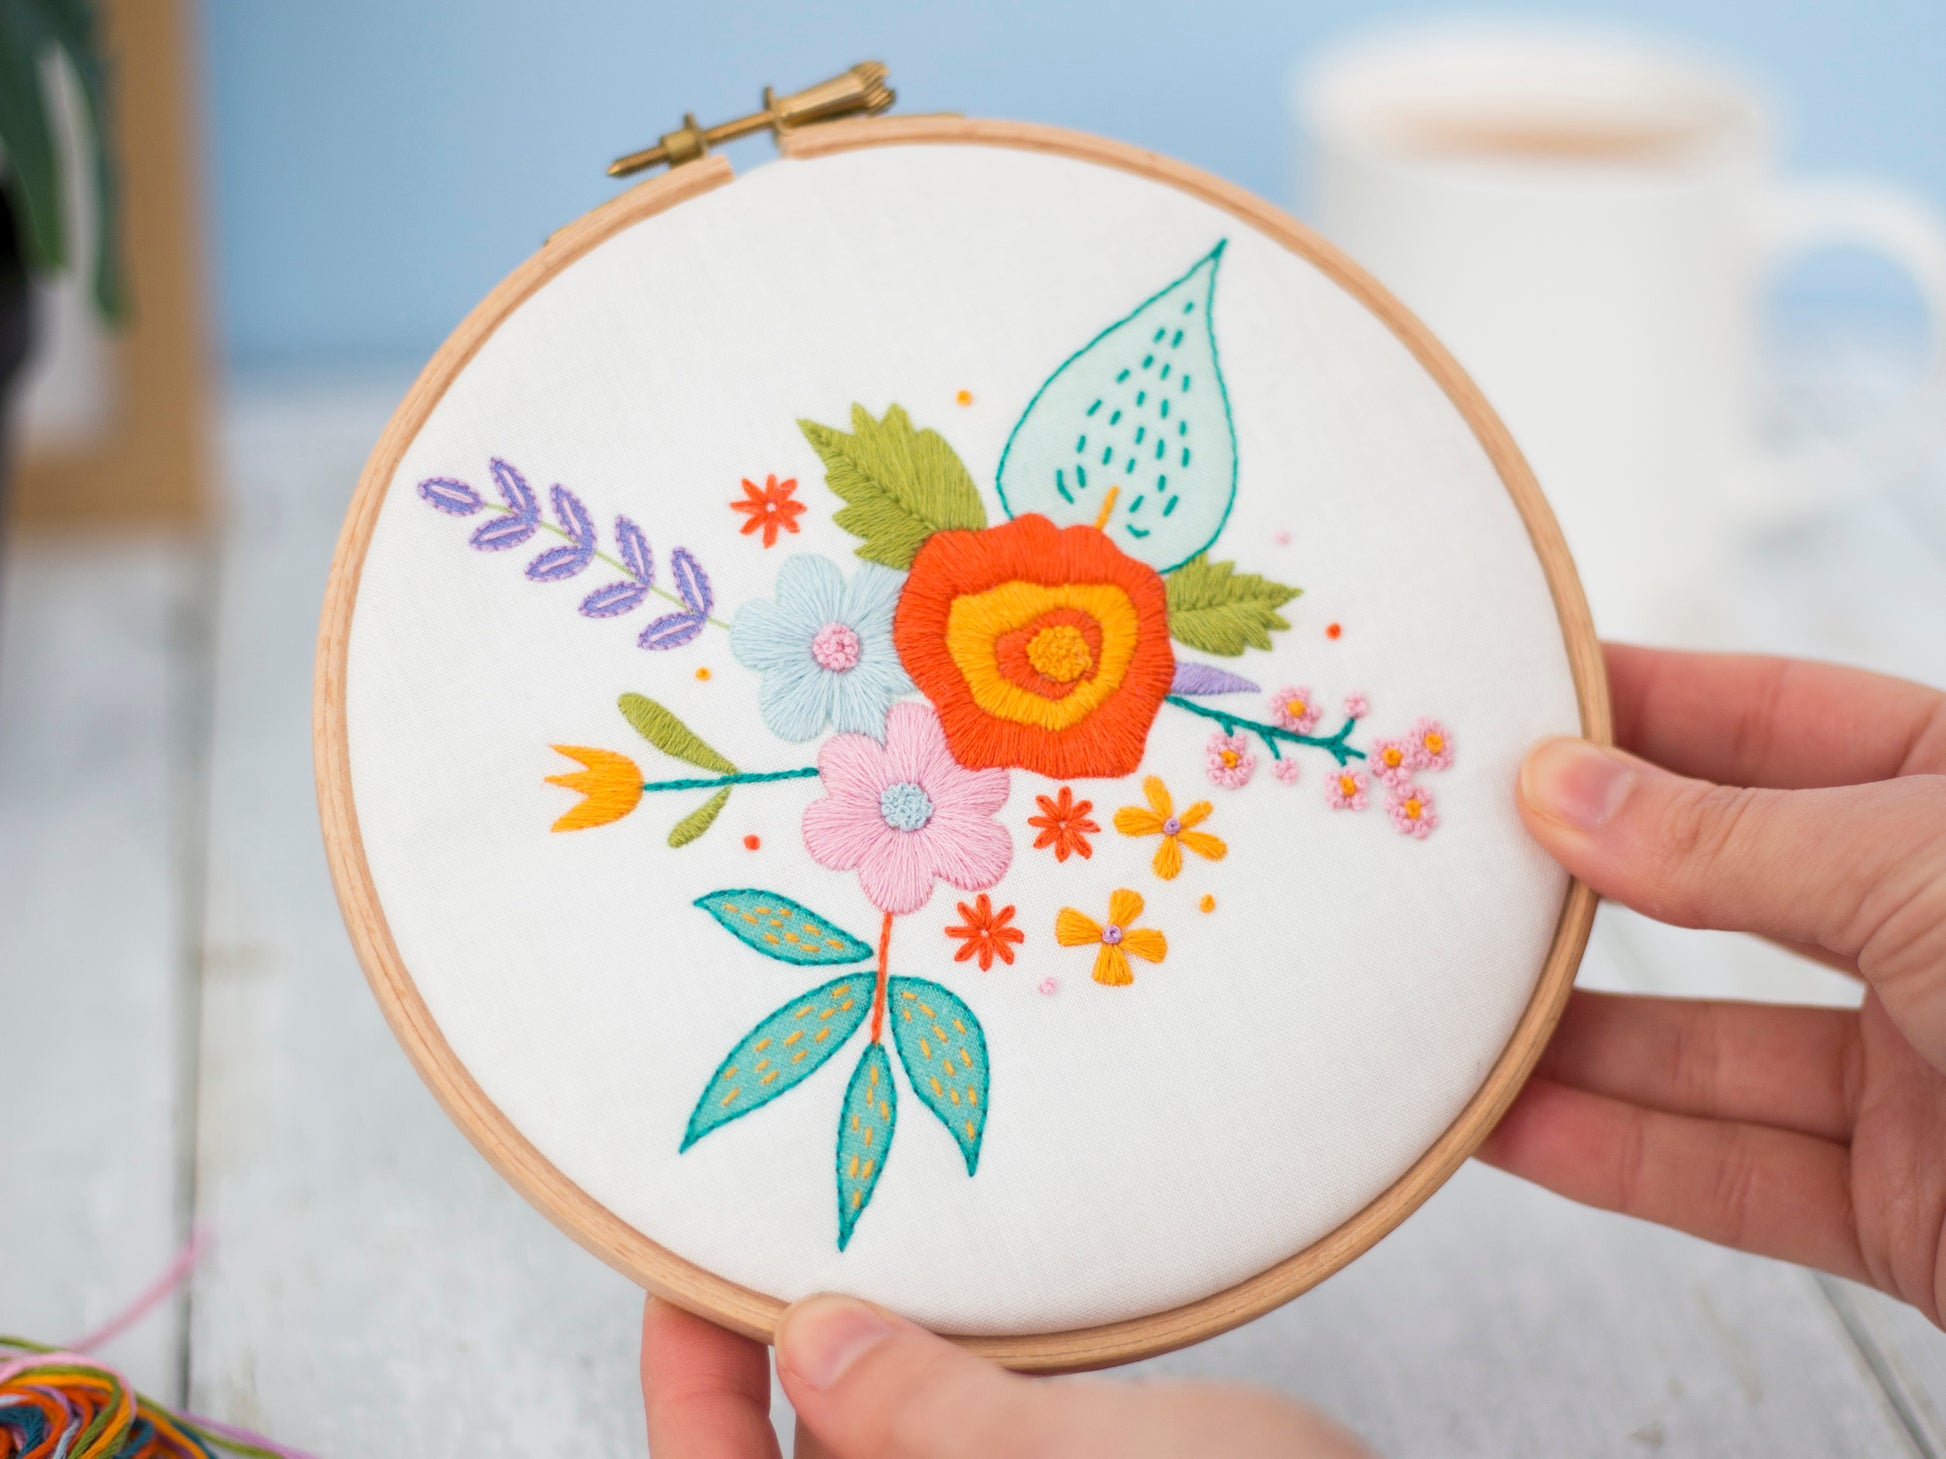 Spring Floral Bloom Embroidery Kit - 40% OFF - Embroidery Kits - ohsewbootiful